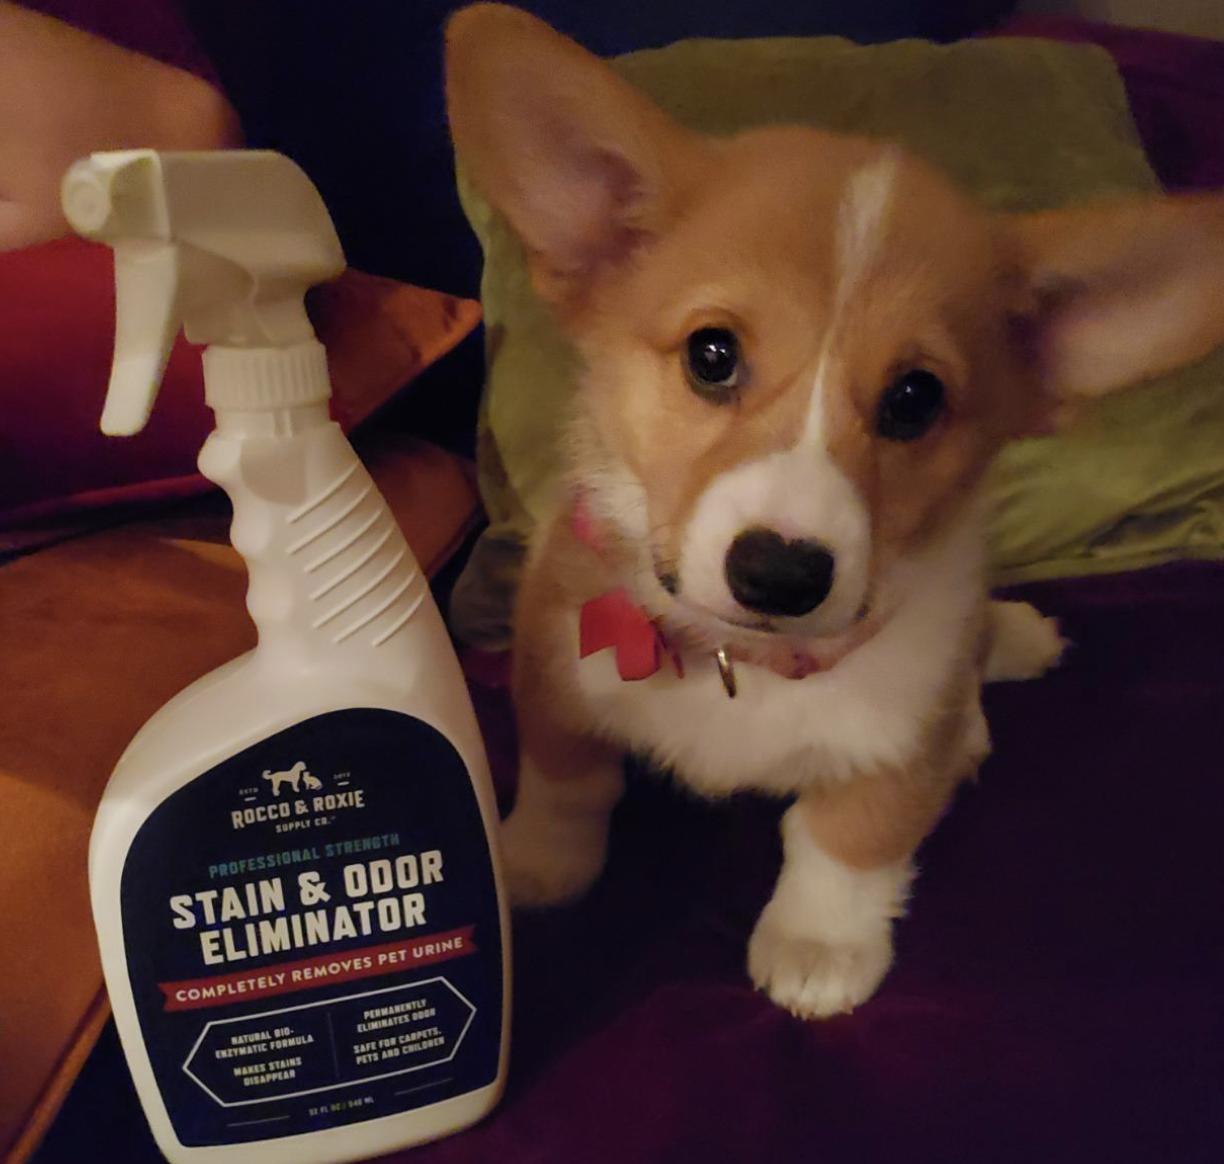 A customer review photo of the bottle next to their corgi puppy